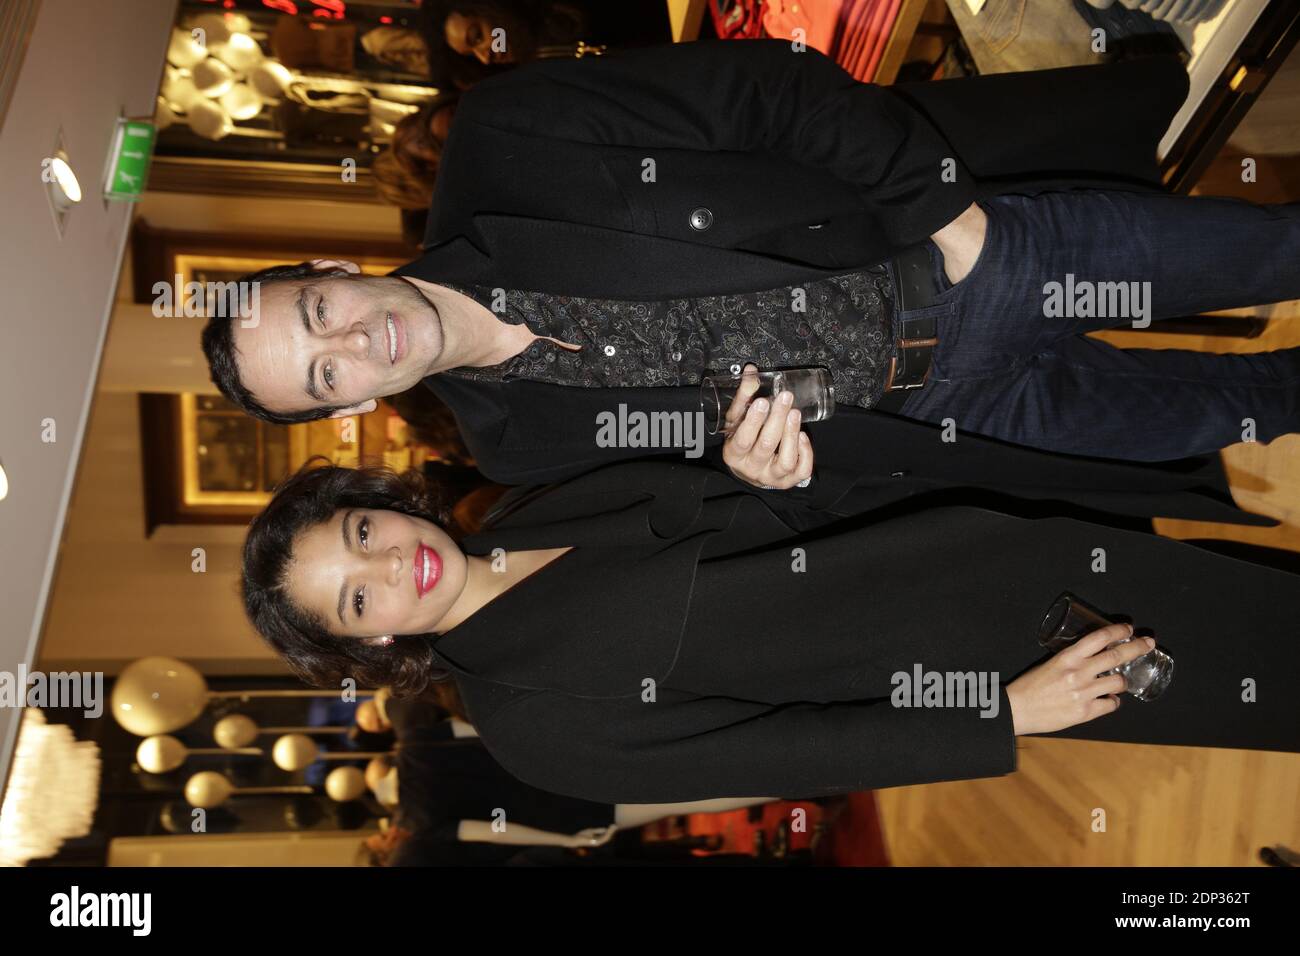 Anthony Delon and her girlfriend Jina Djemba attending Tommy Hilfiger  boutique opening party in Paris, France, March 31, 2015. Photo by Jerome  Domine/ABACAPRESS.COM Stock Photo - Alamy